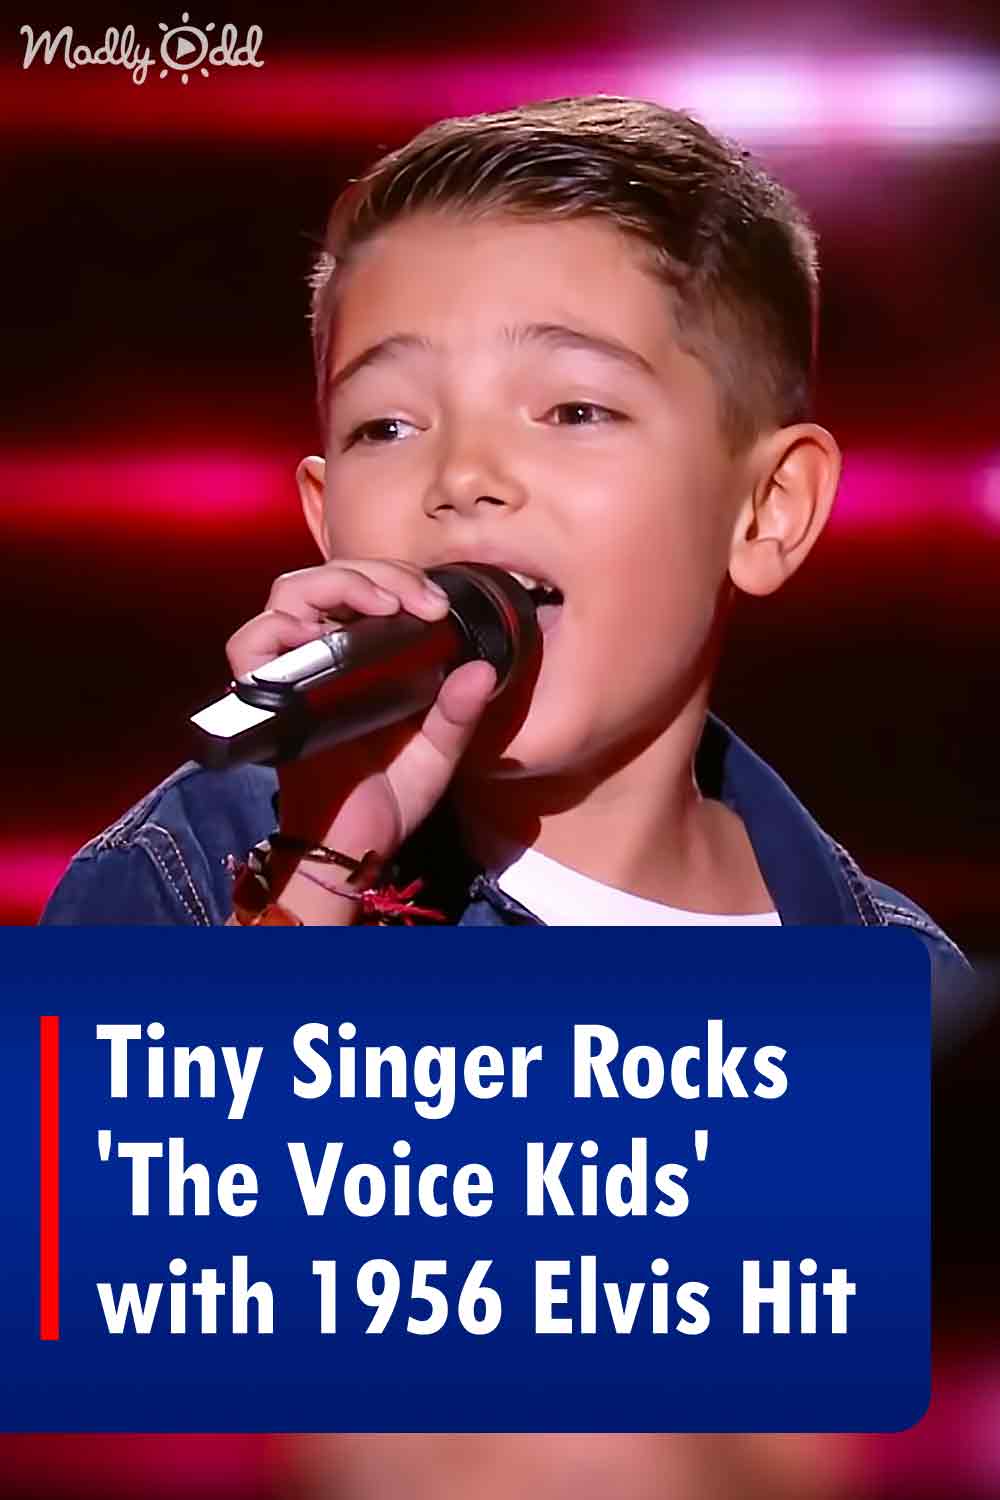 Tiny Singer Rocks \'The Voice Kids\' with 1956 Elvis Hit